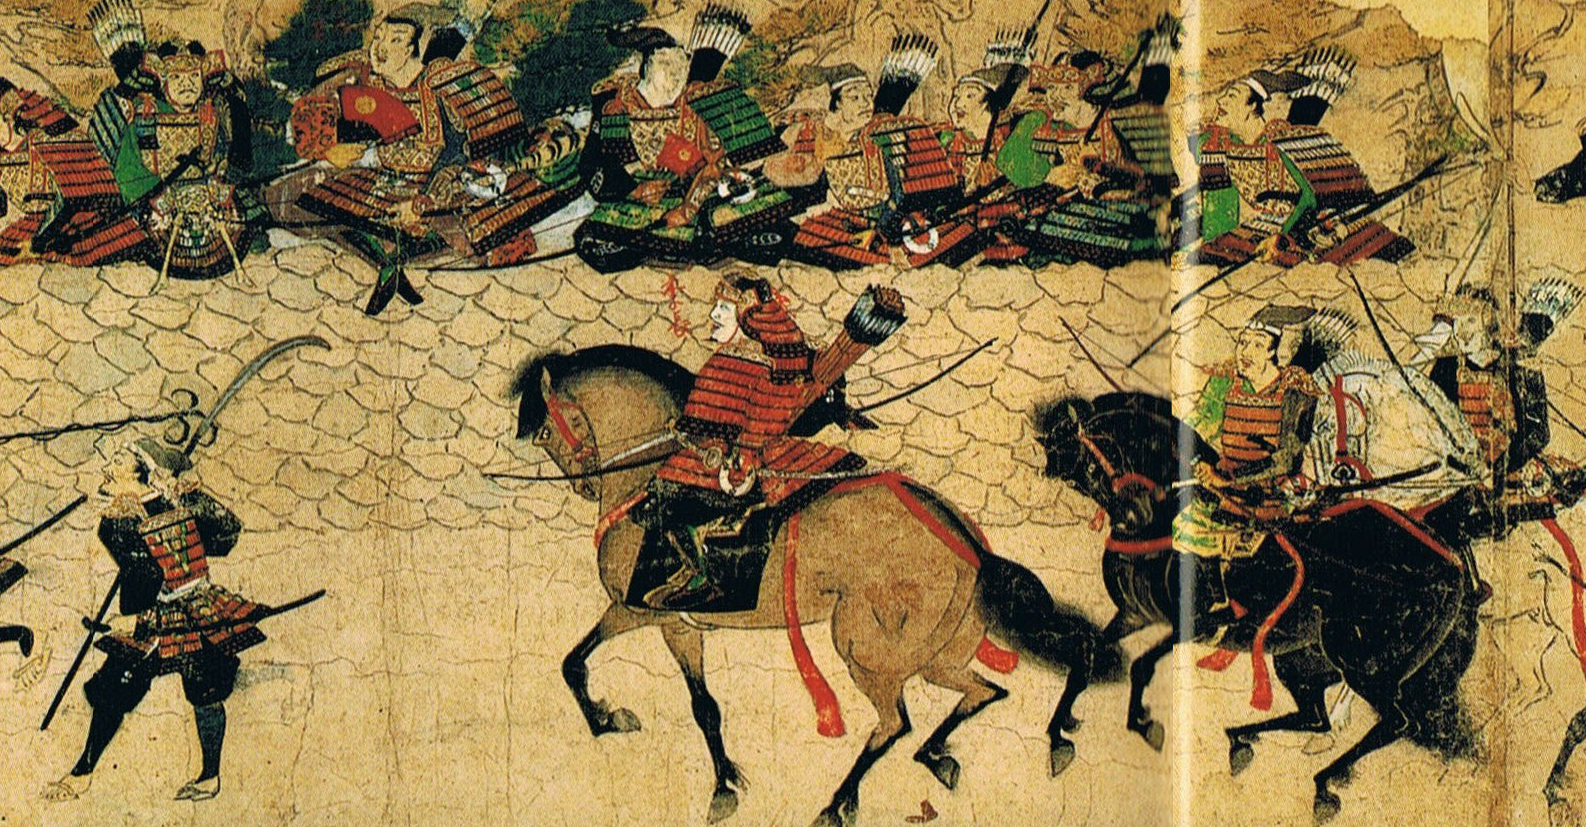 When Mongols Collided with Samurai: The Unsuccessful Mongol Invasions of Japan